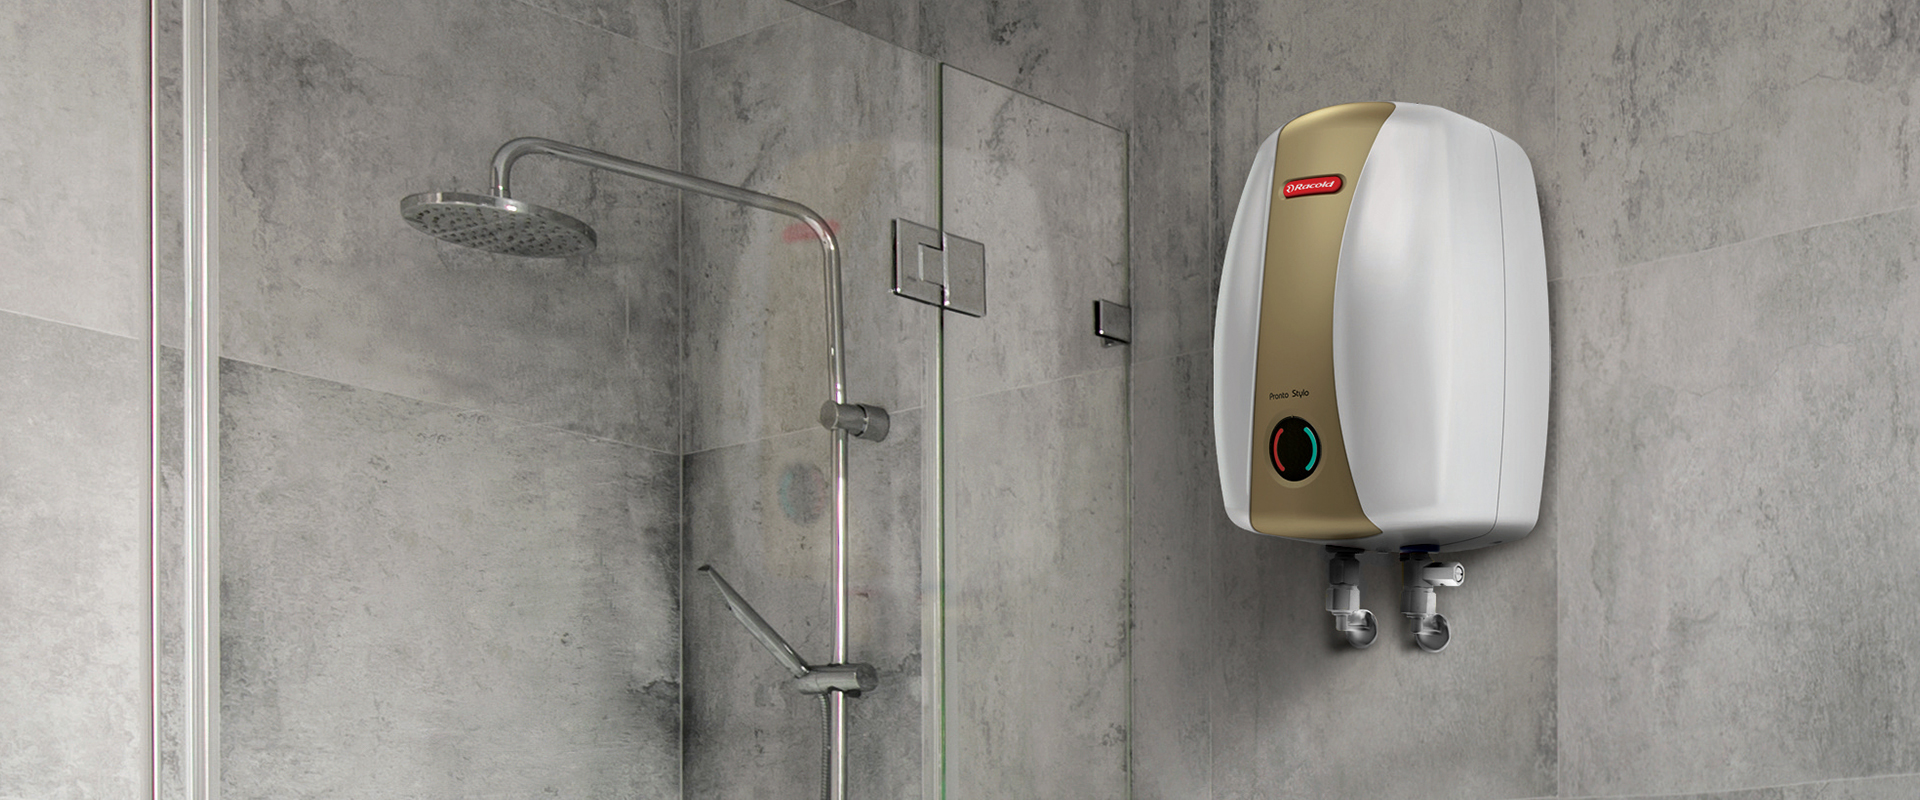 Why should you choose an electric instant water heater